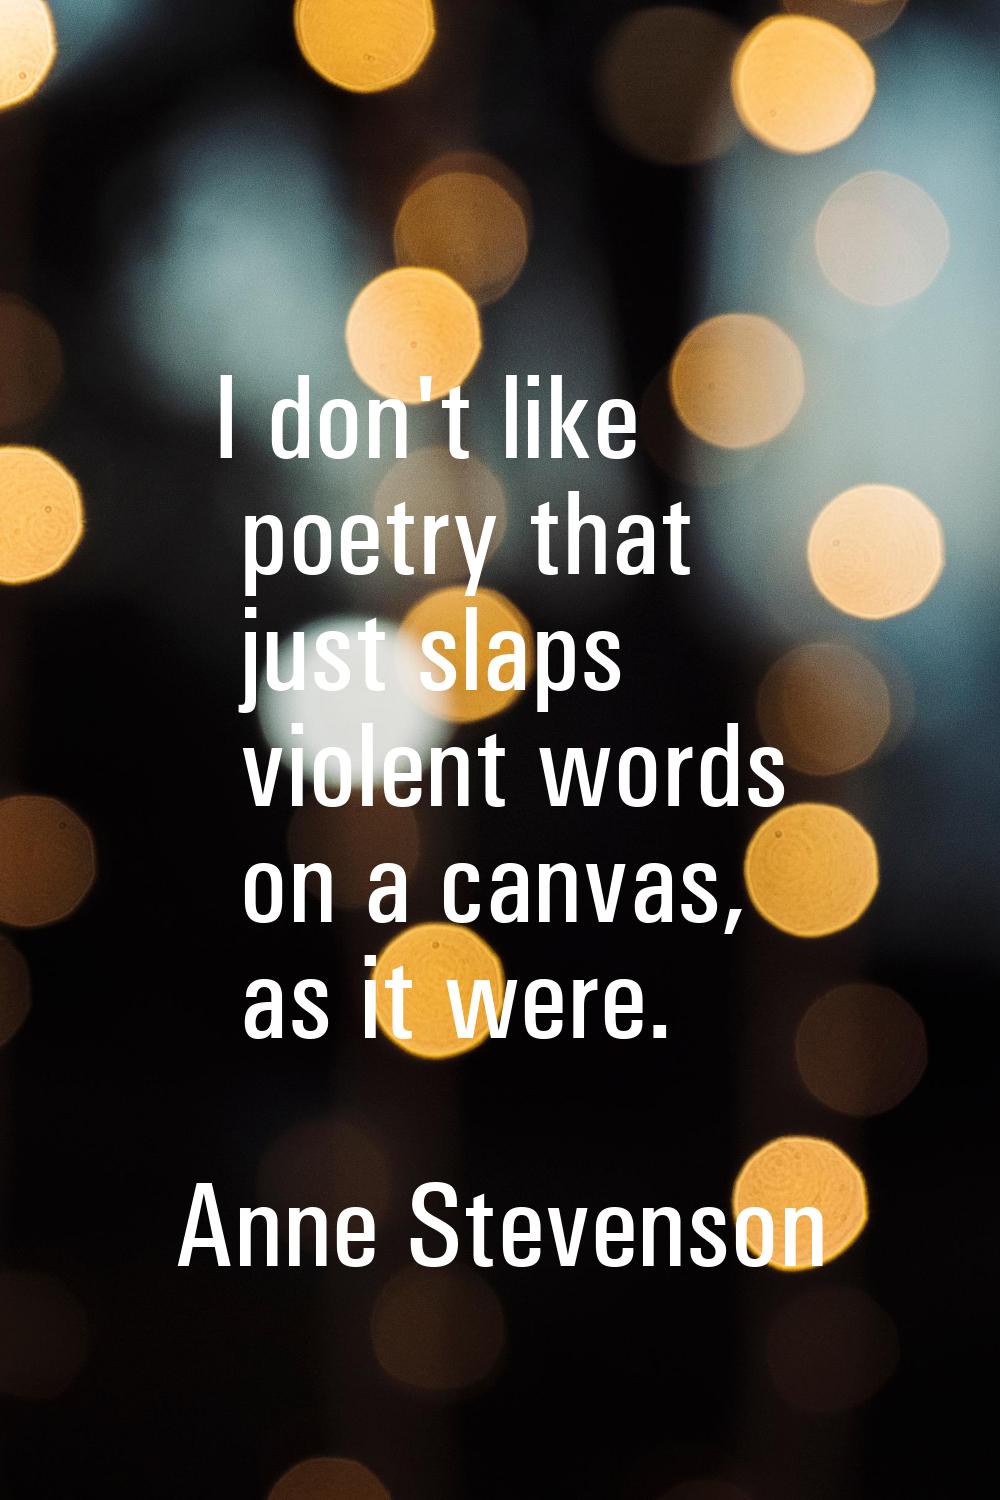 I don't like poetry that just slaps violent words on a canvas, as it were.